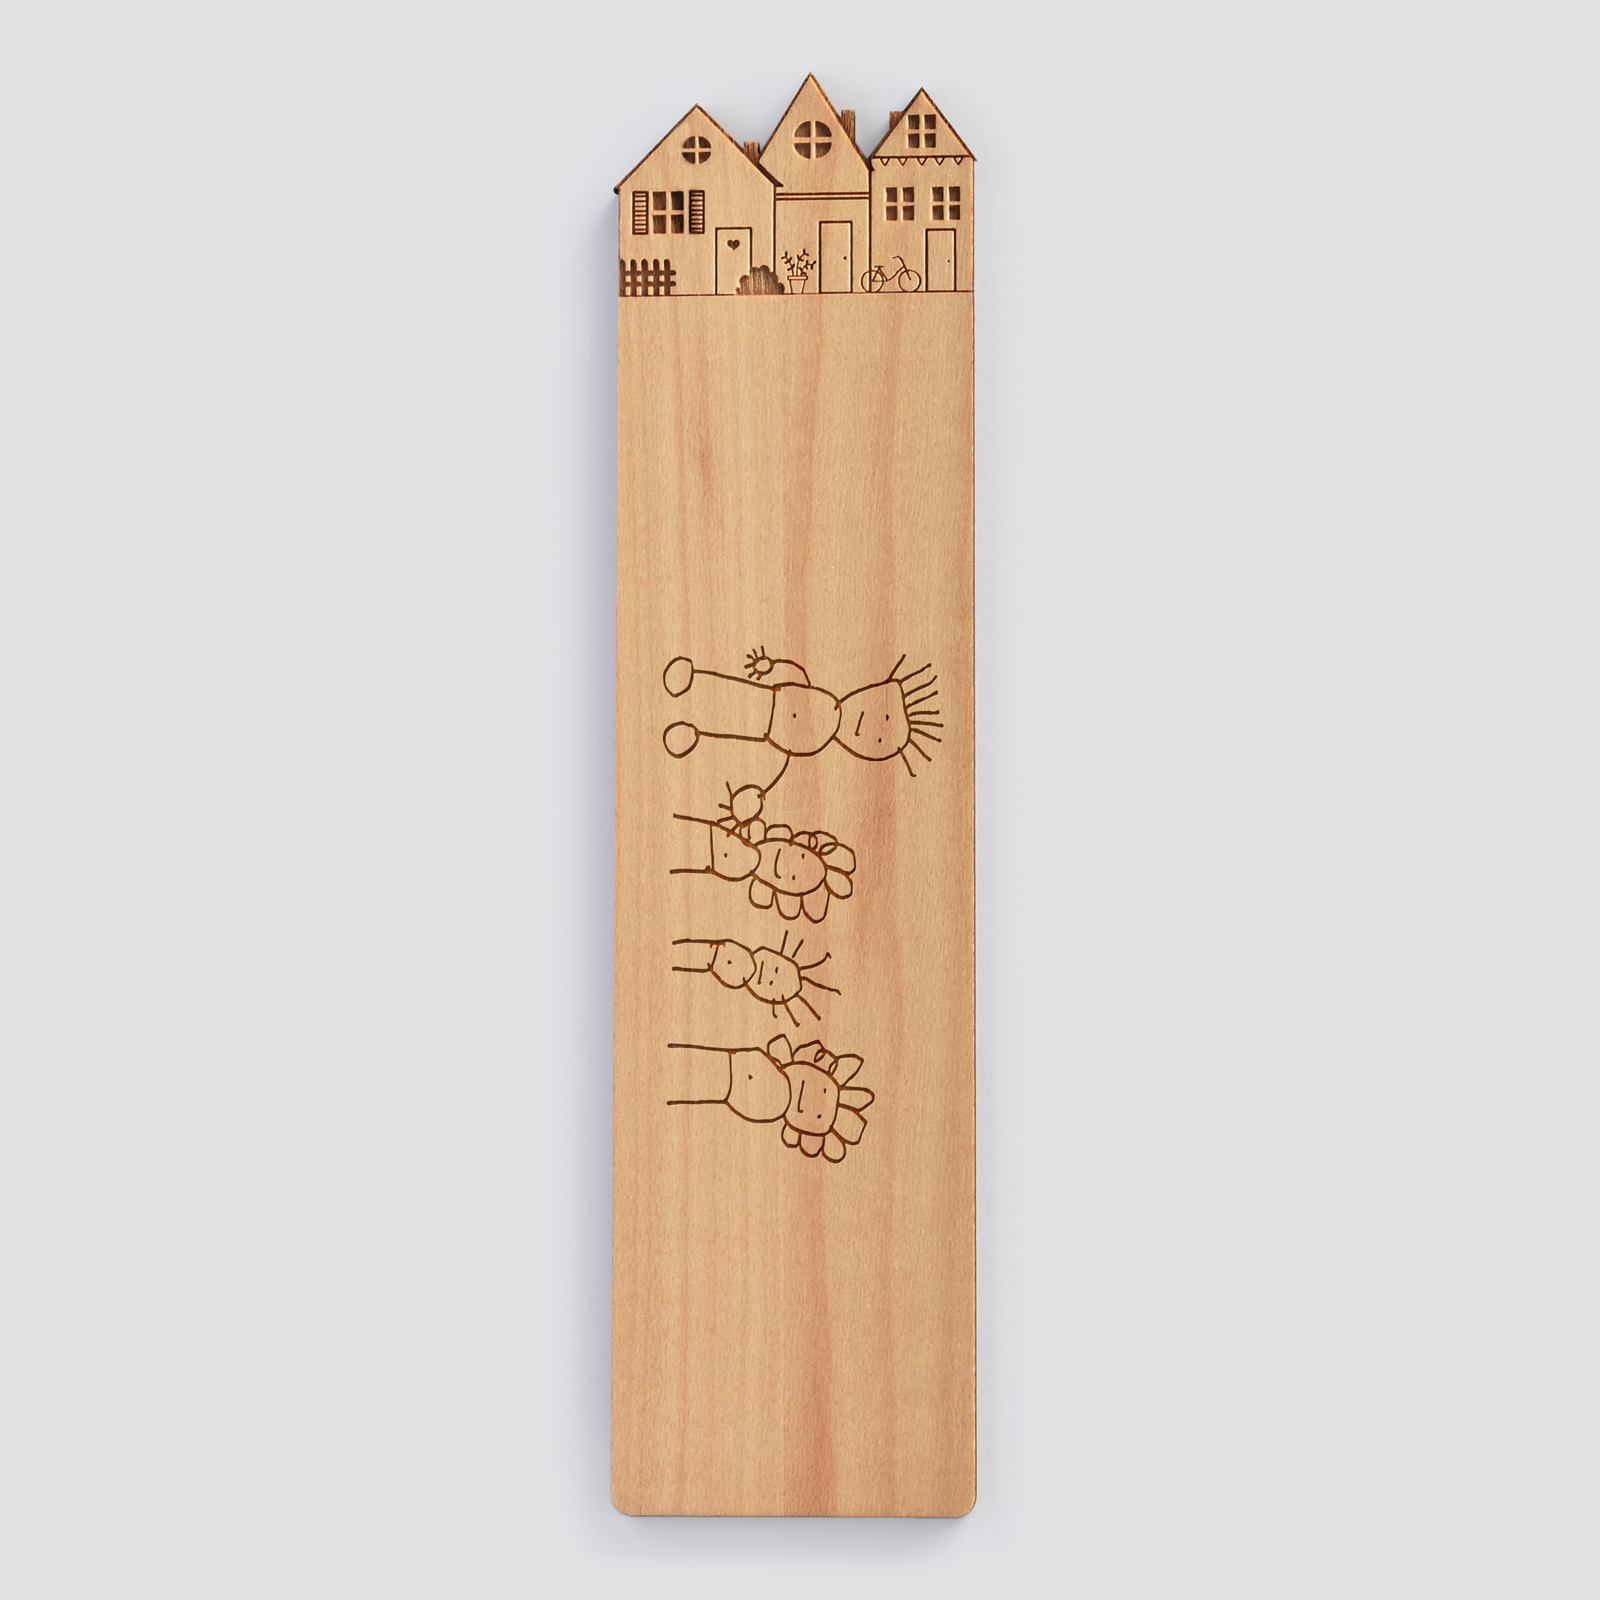 Personalised "City" engraved wooden bookmark - sketch